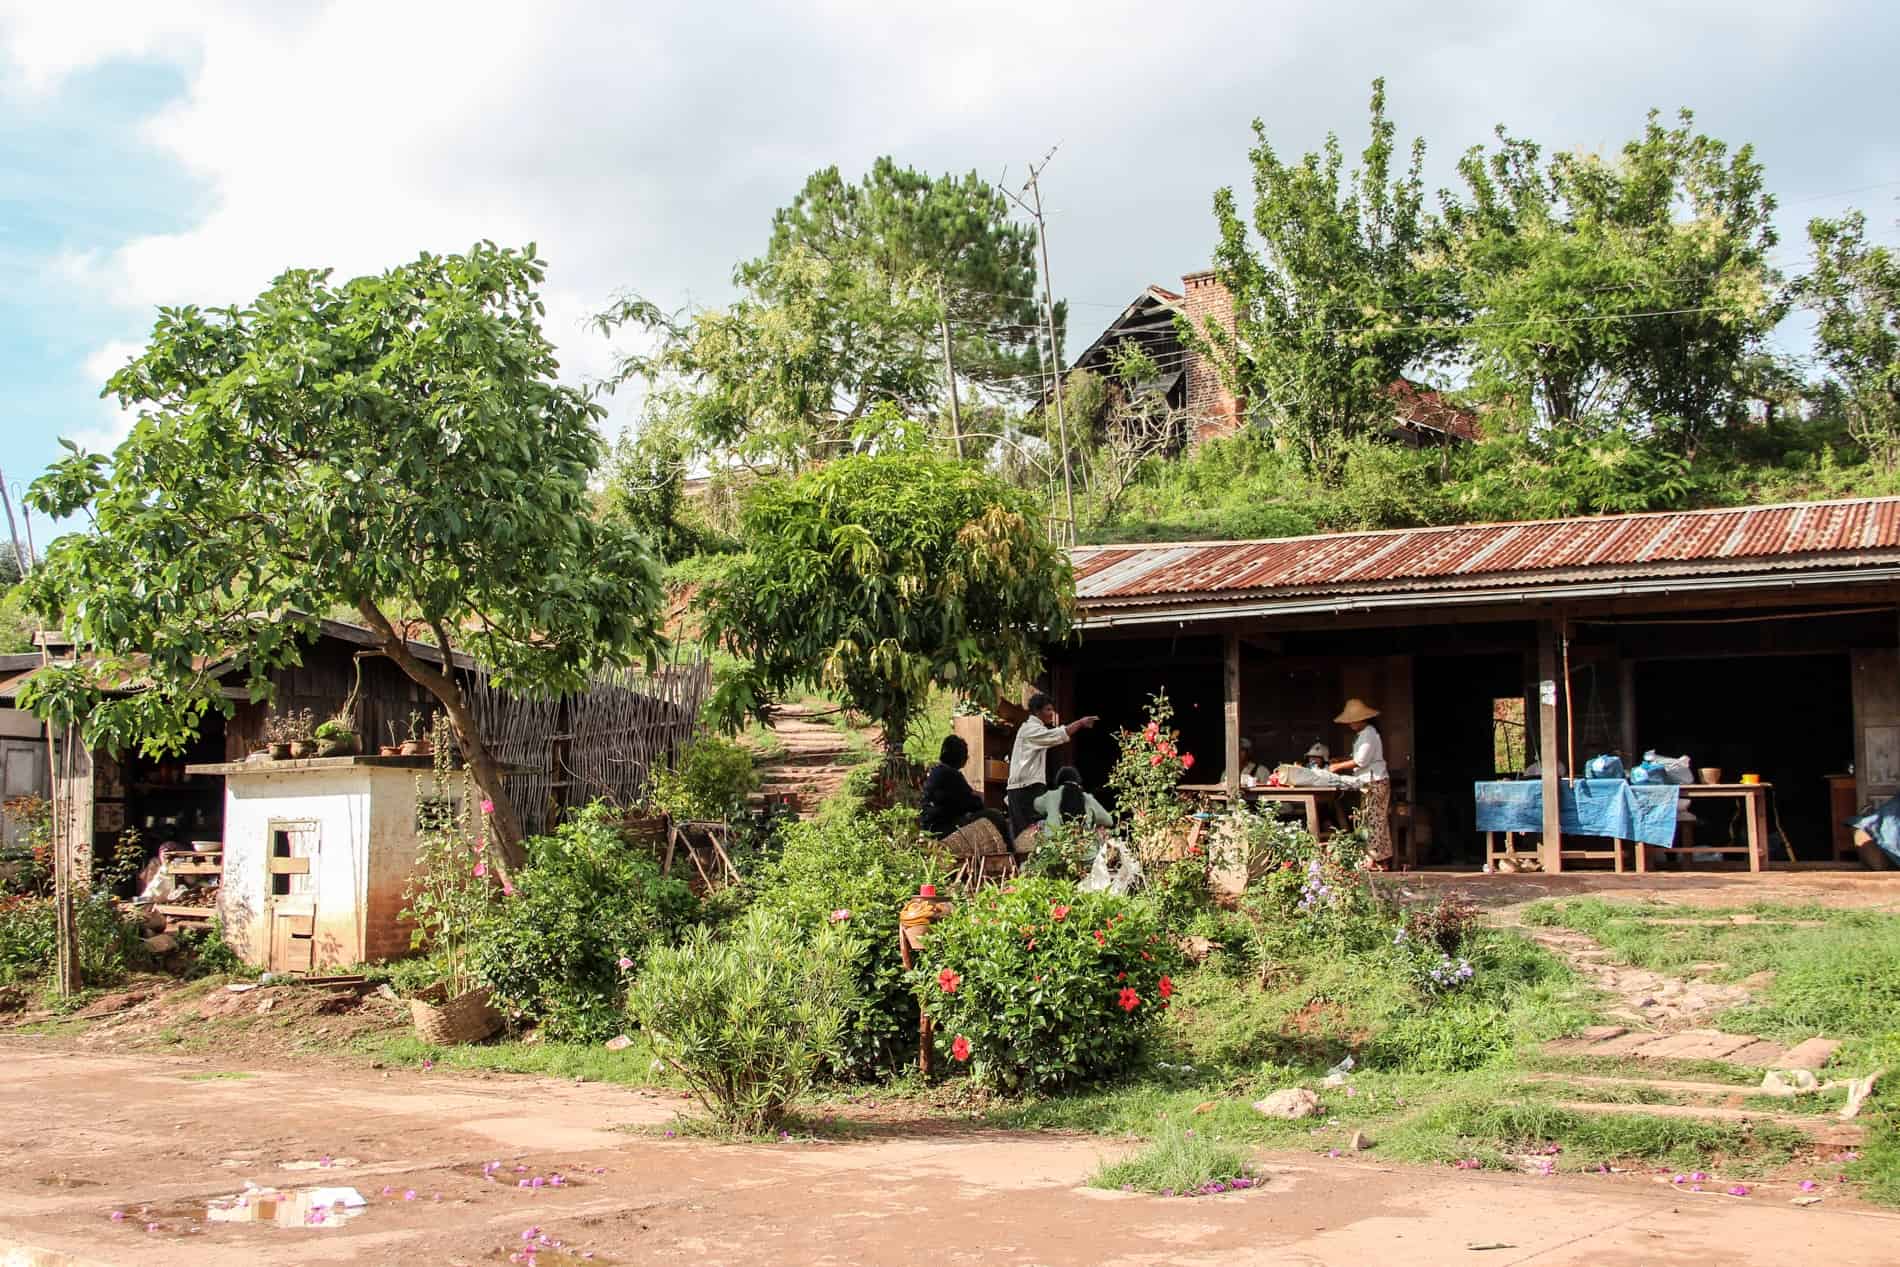 People gathered in the porch of long hut in thick forest on Dong Deng island, Laos.